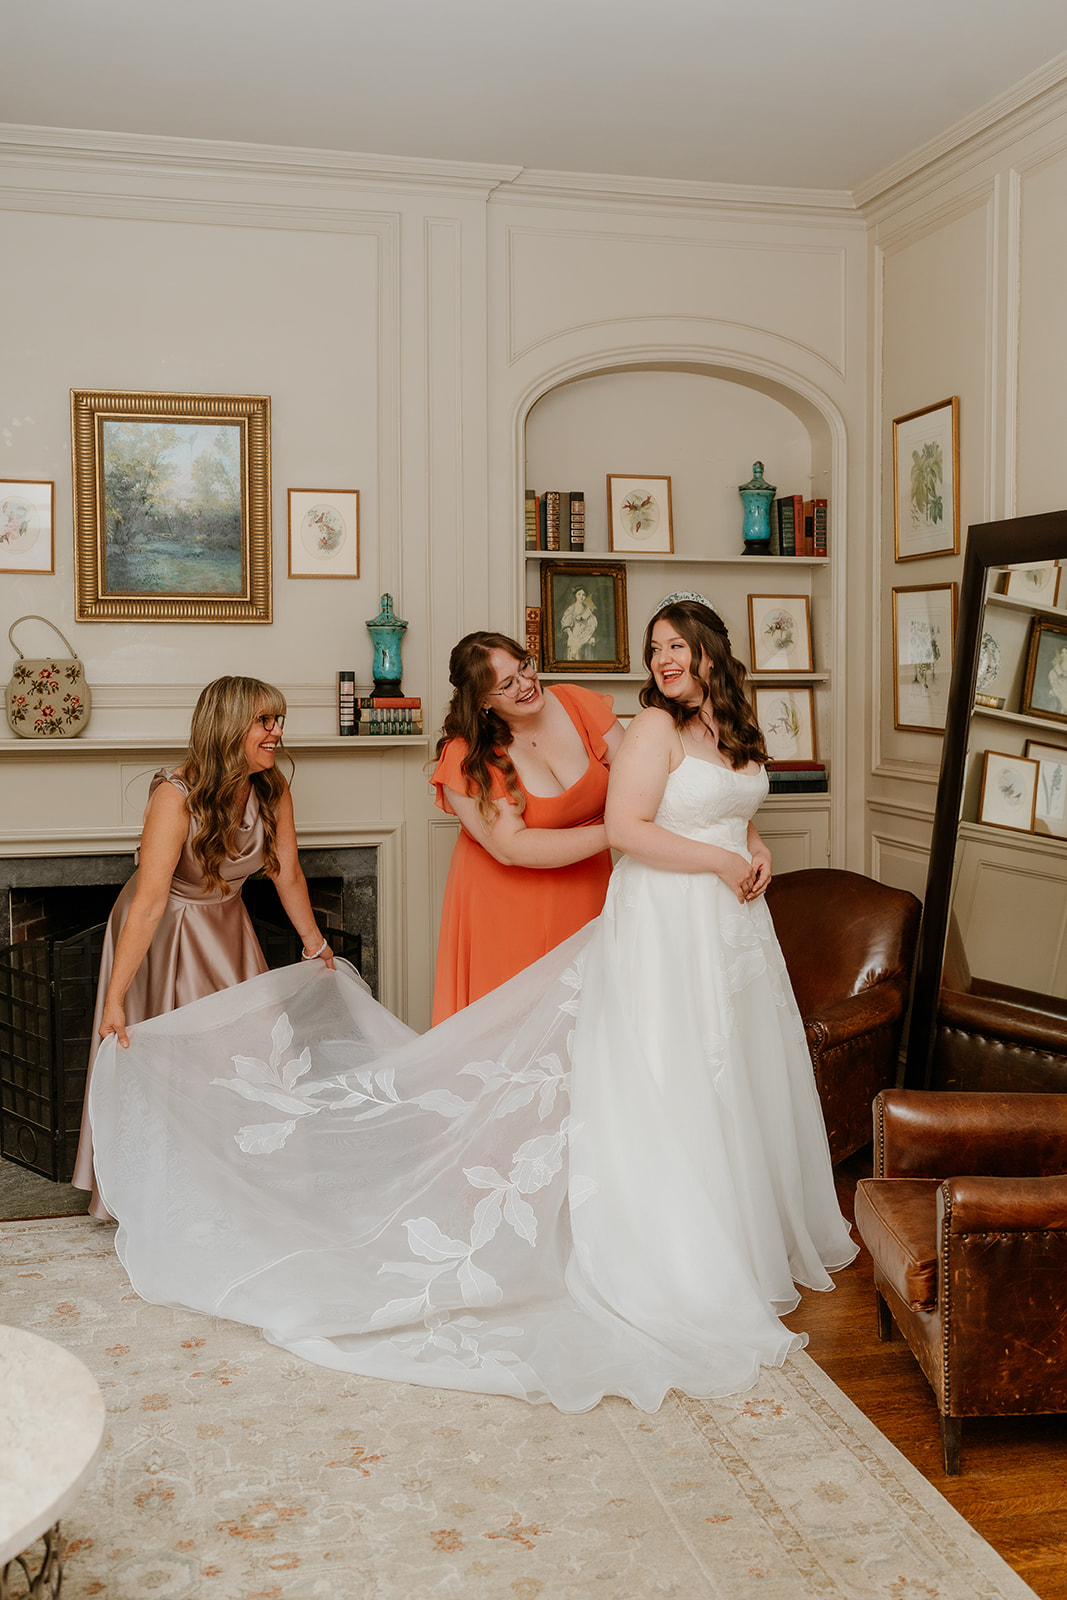 Three women in formal attire, one in a white bridal gown and two in dresses, smiling and adjusting the bride's dress in an elegant room at the estate at moraine farm